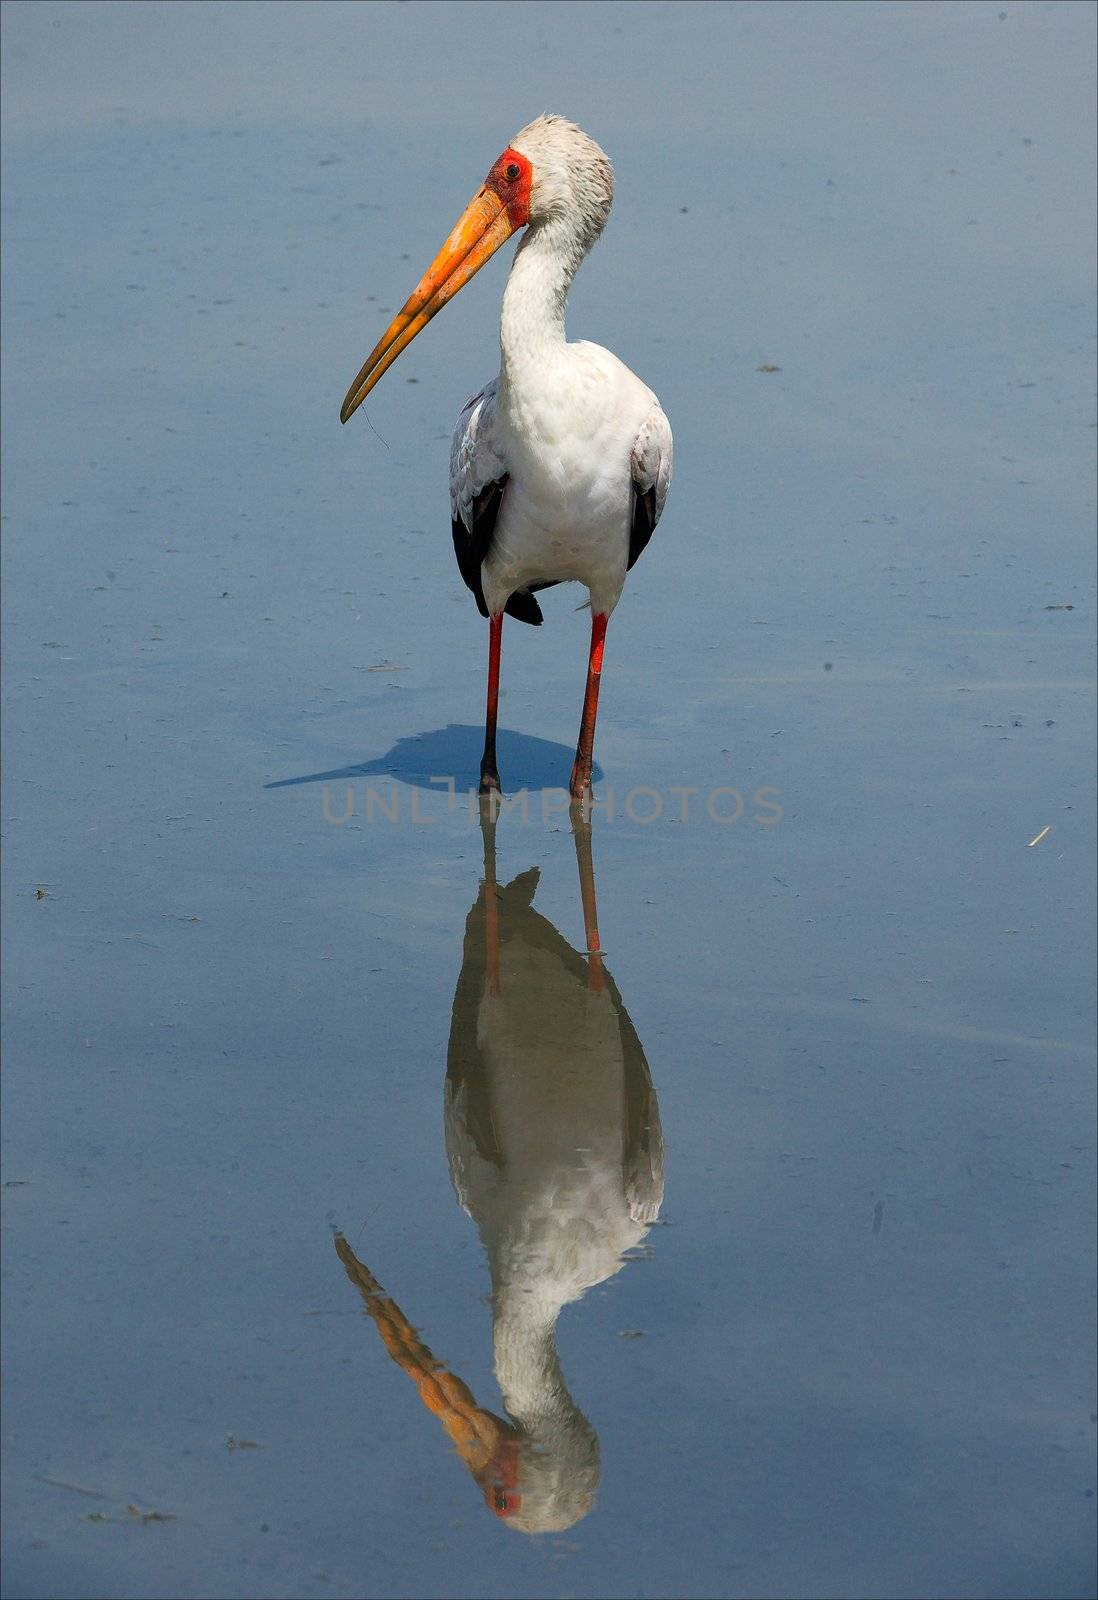 The Yellow-billed Stork, Mycteria ibis, is a large wading bird in the stork family Ciconiidae. It occurs Africa South of Sahara and in Madagascar. Plumage mainly pinkish-white with black wings and tail; bill yellow, blunt, and decurved at tip. 